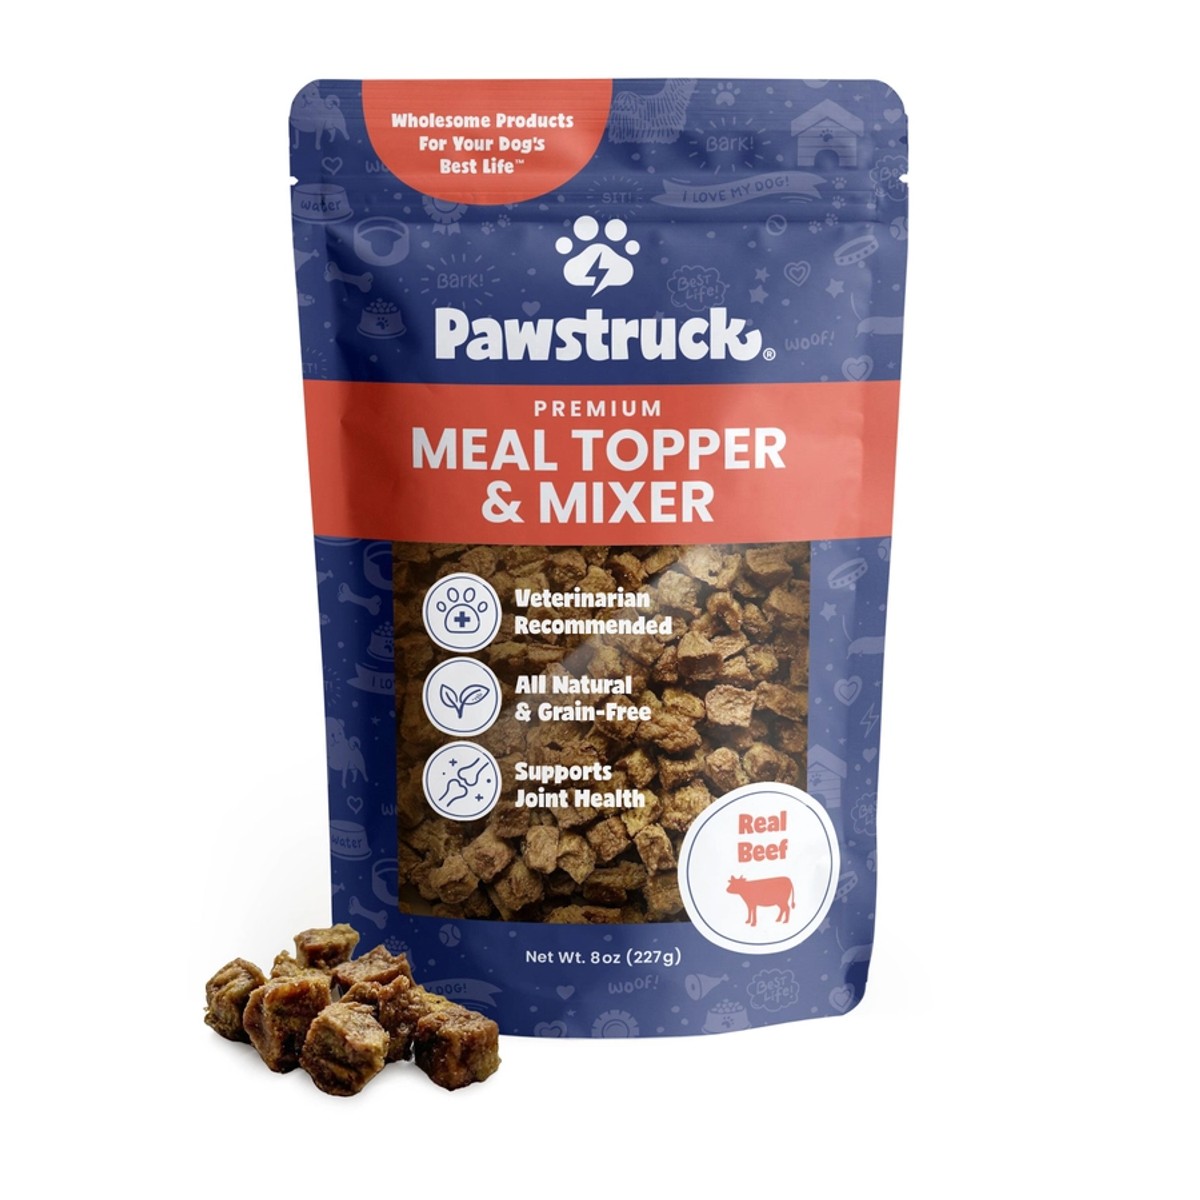 Pawstruck Dog Food Meal Topper & Mixer - Beef